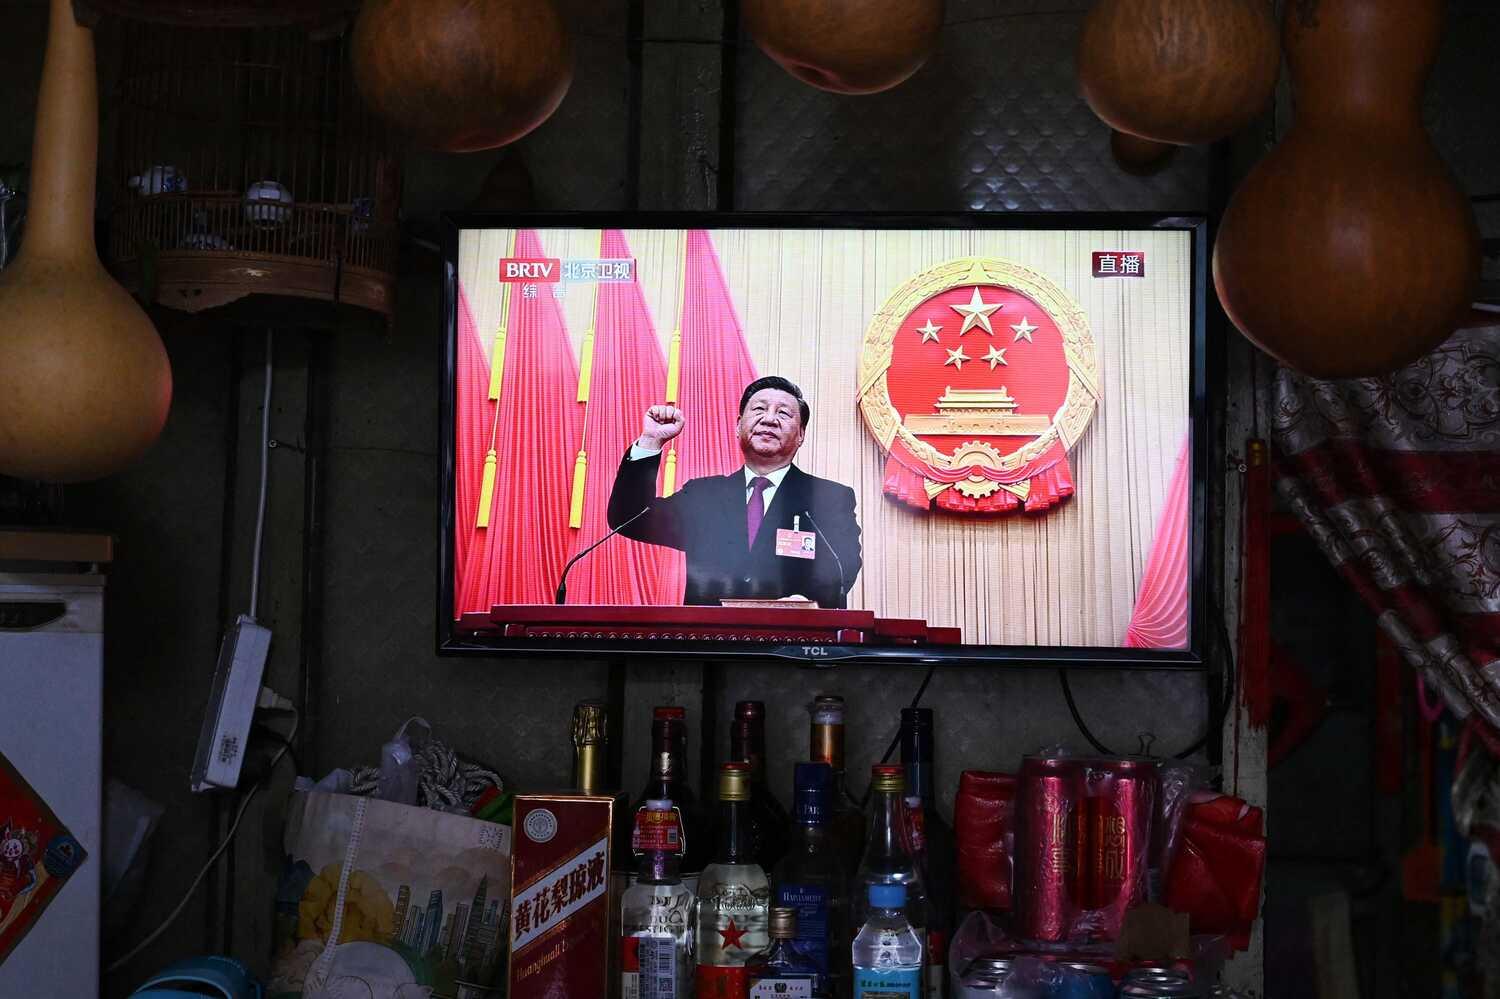 On a television screen, Xi Jinping, in a dark suit, with pink and beige curtains behind him. The bright TV screen contrasts with the dark background of goods for sale at a convenience store.